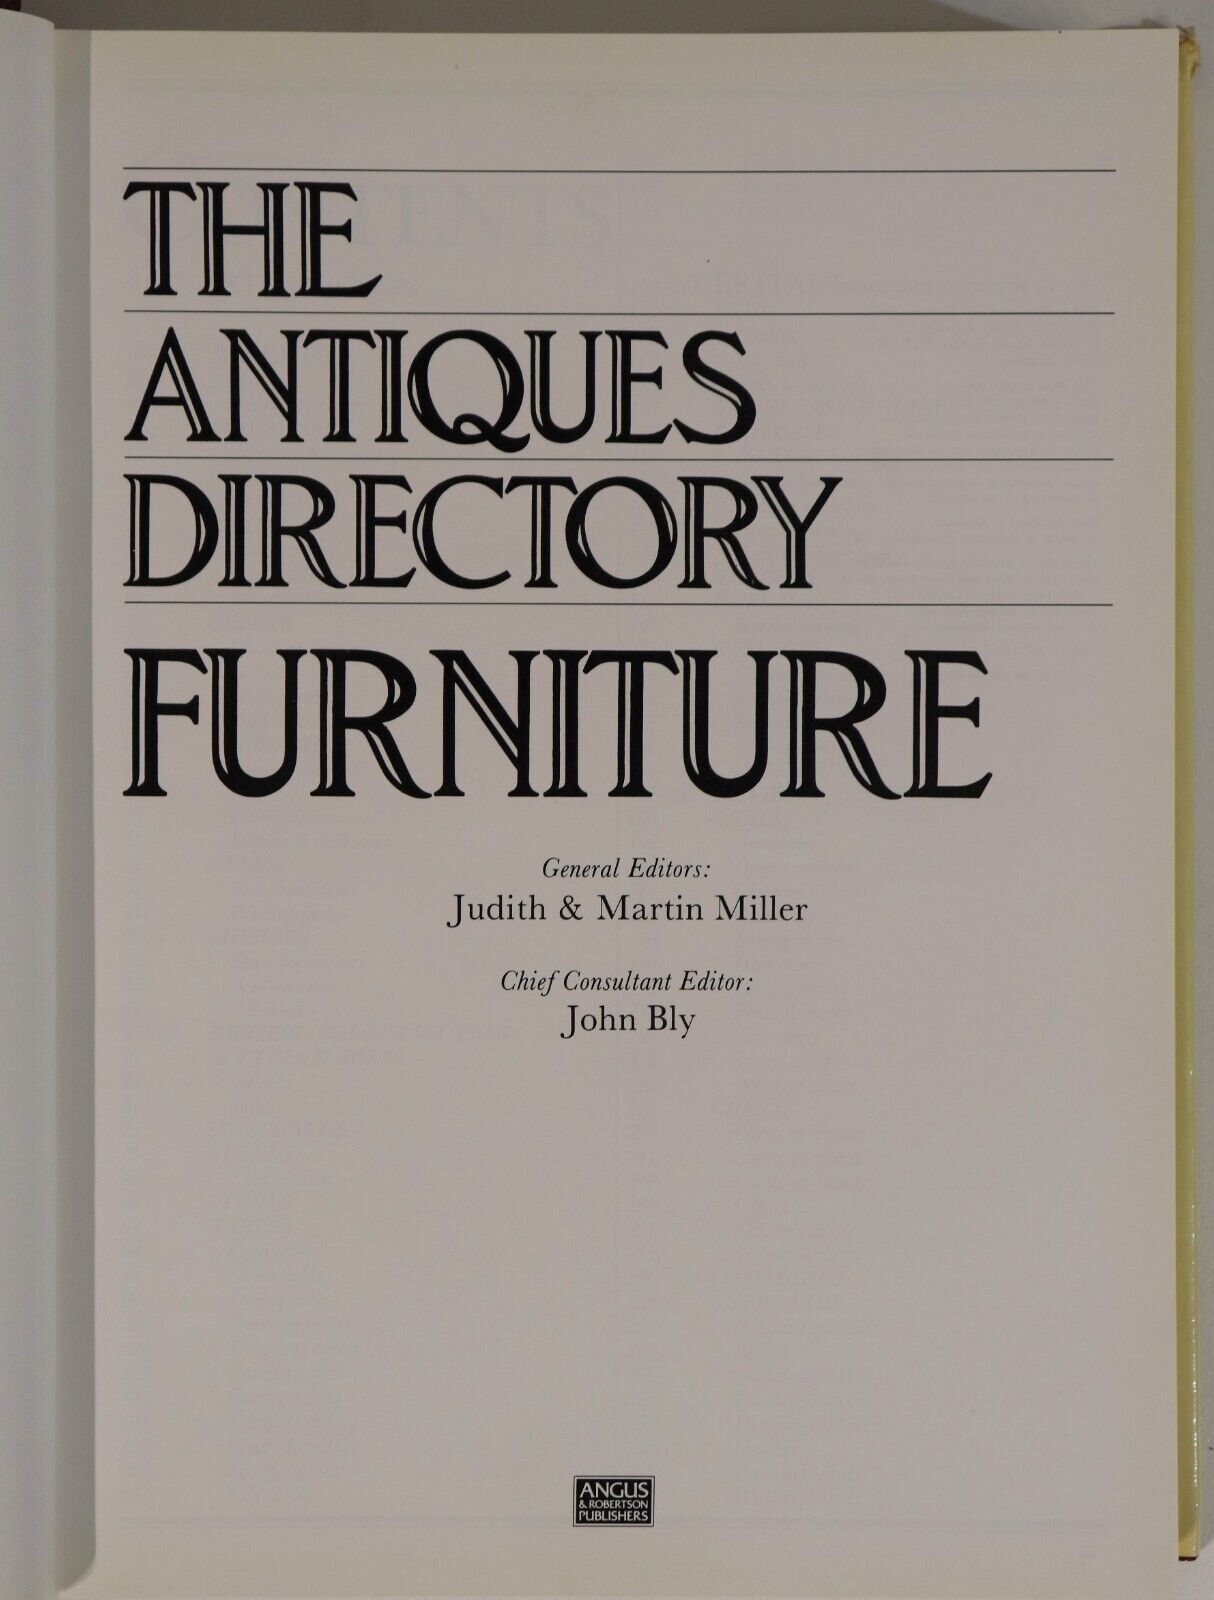 The Antiques Directory: Furniture - 1985 - Antique Furniture Reference Book - 0